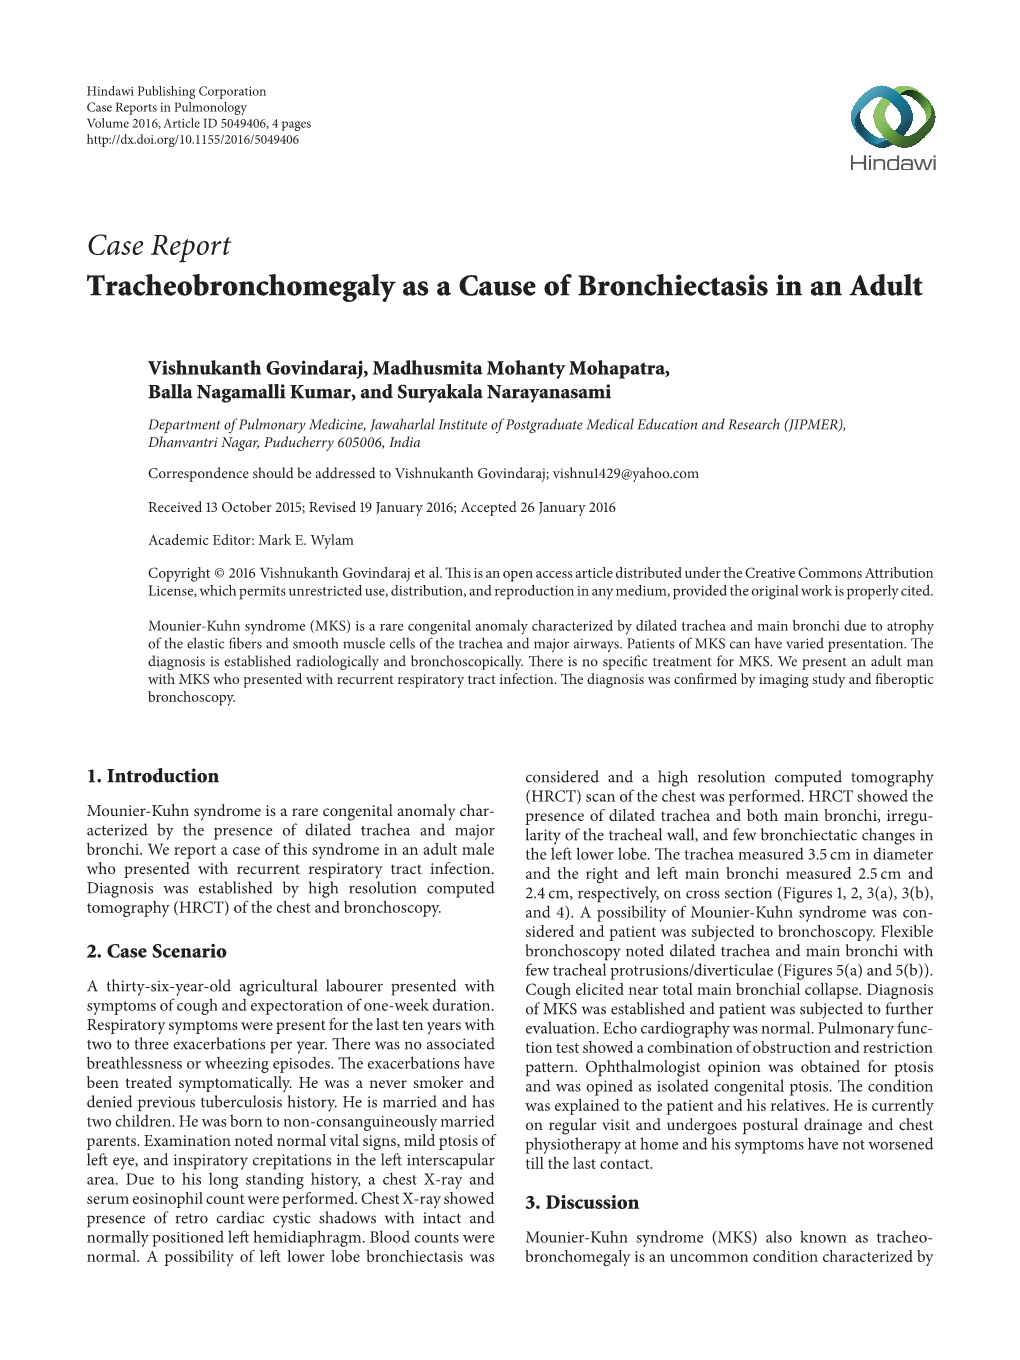 Tracheobronchomegaly As a Cause of Bronchiectasis in an Adult